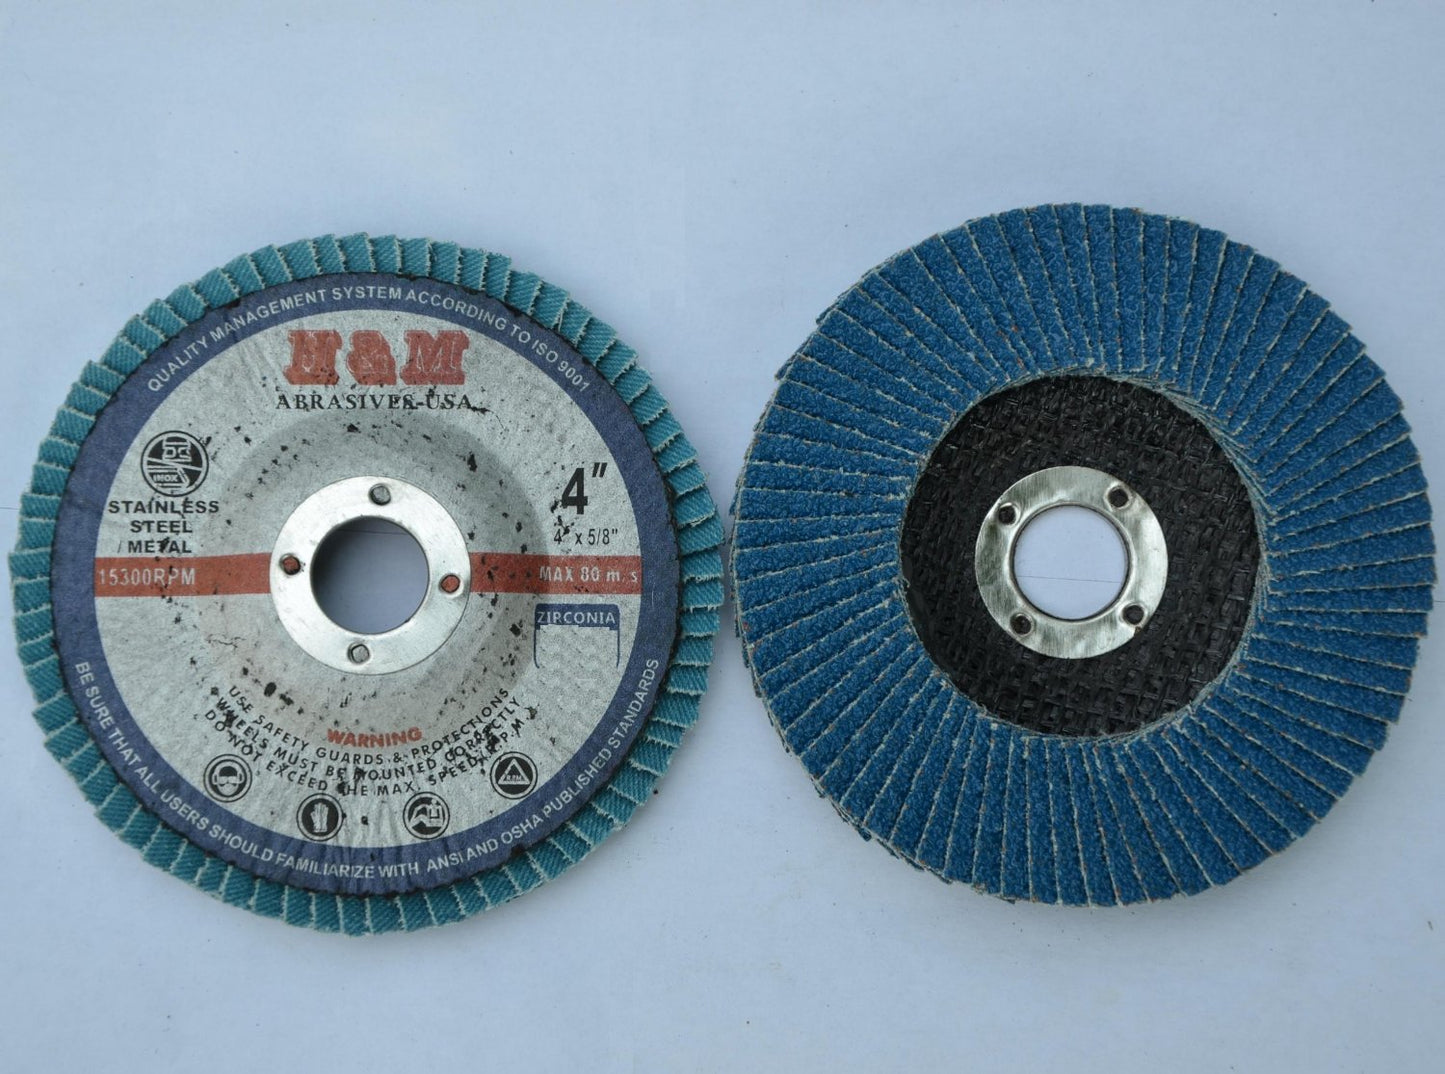 4 inch 4" x 5/8" FLAP DISCS in 40 60 80 120 Grit for Stainless Steel & Metal